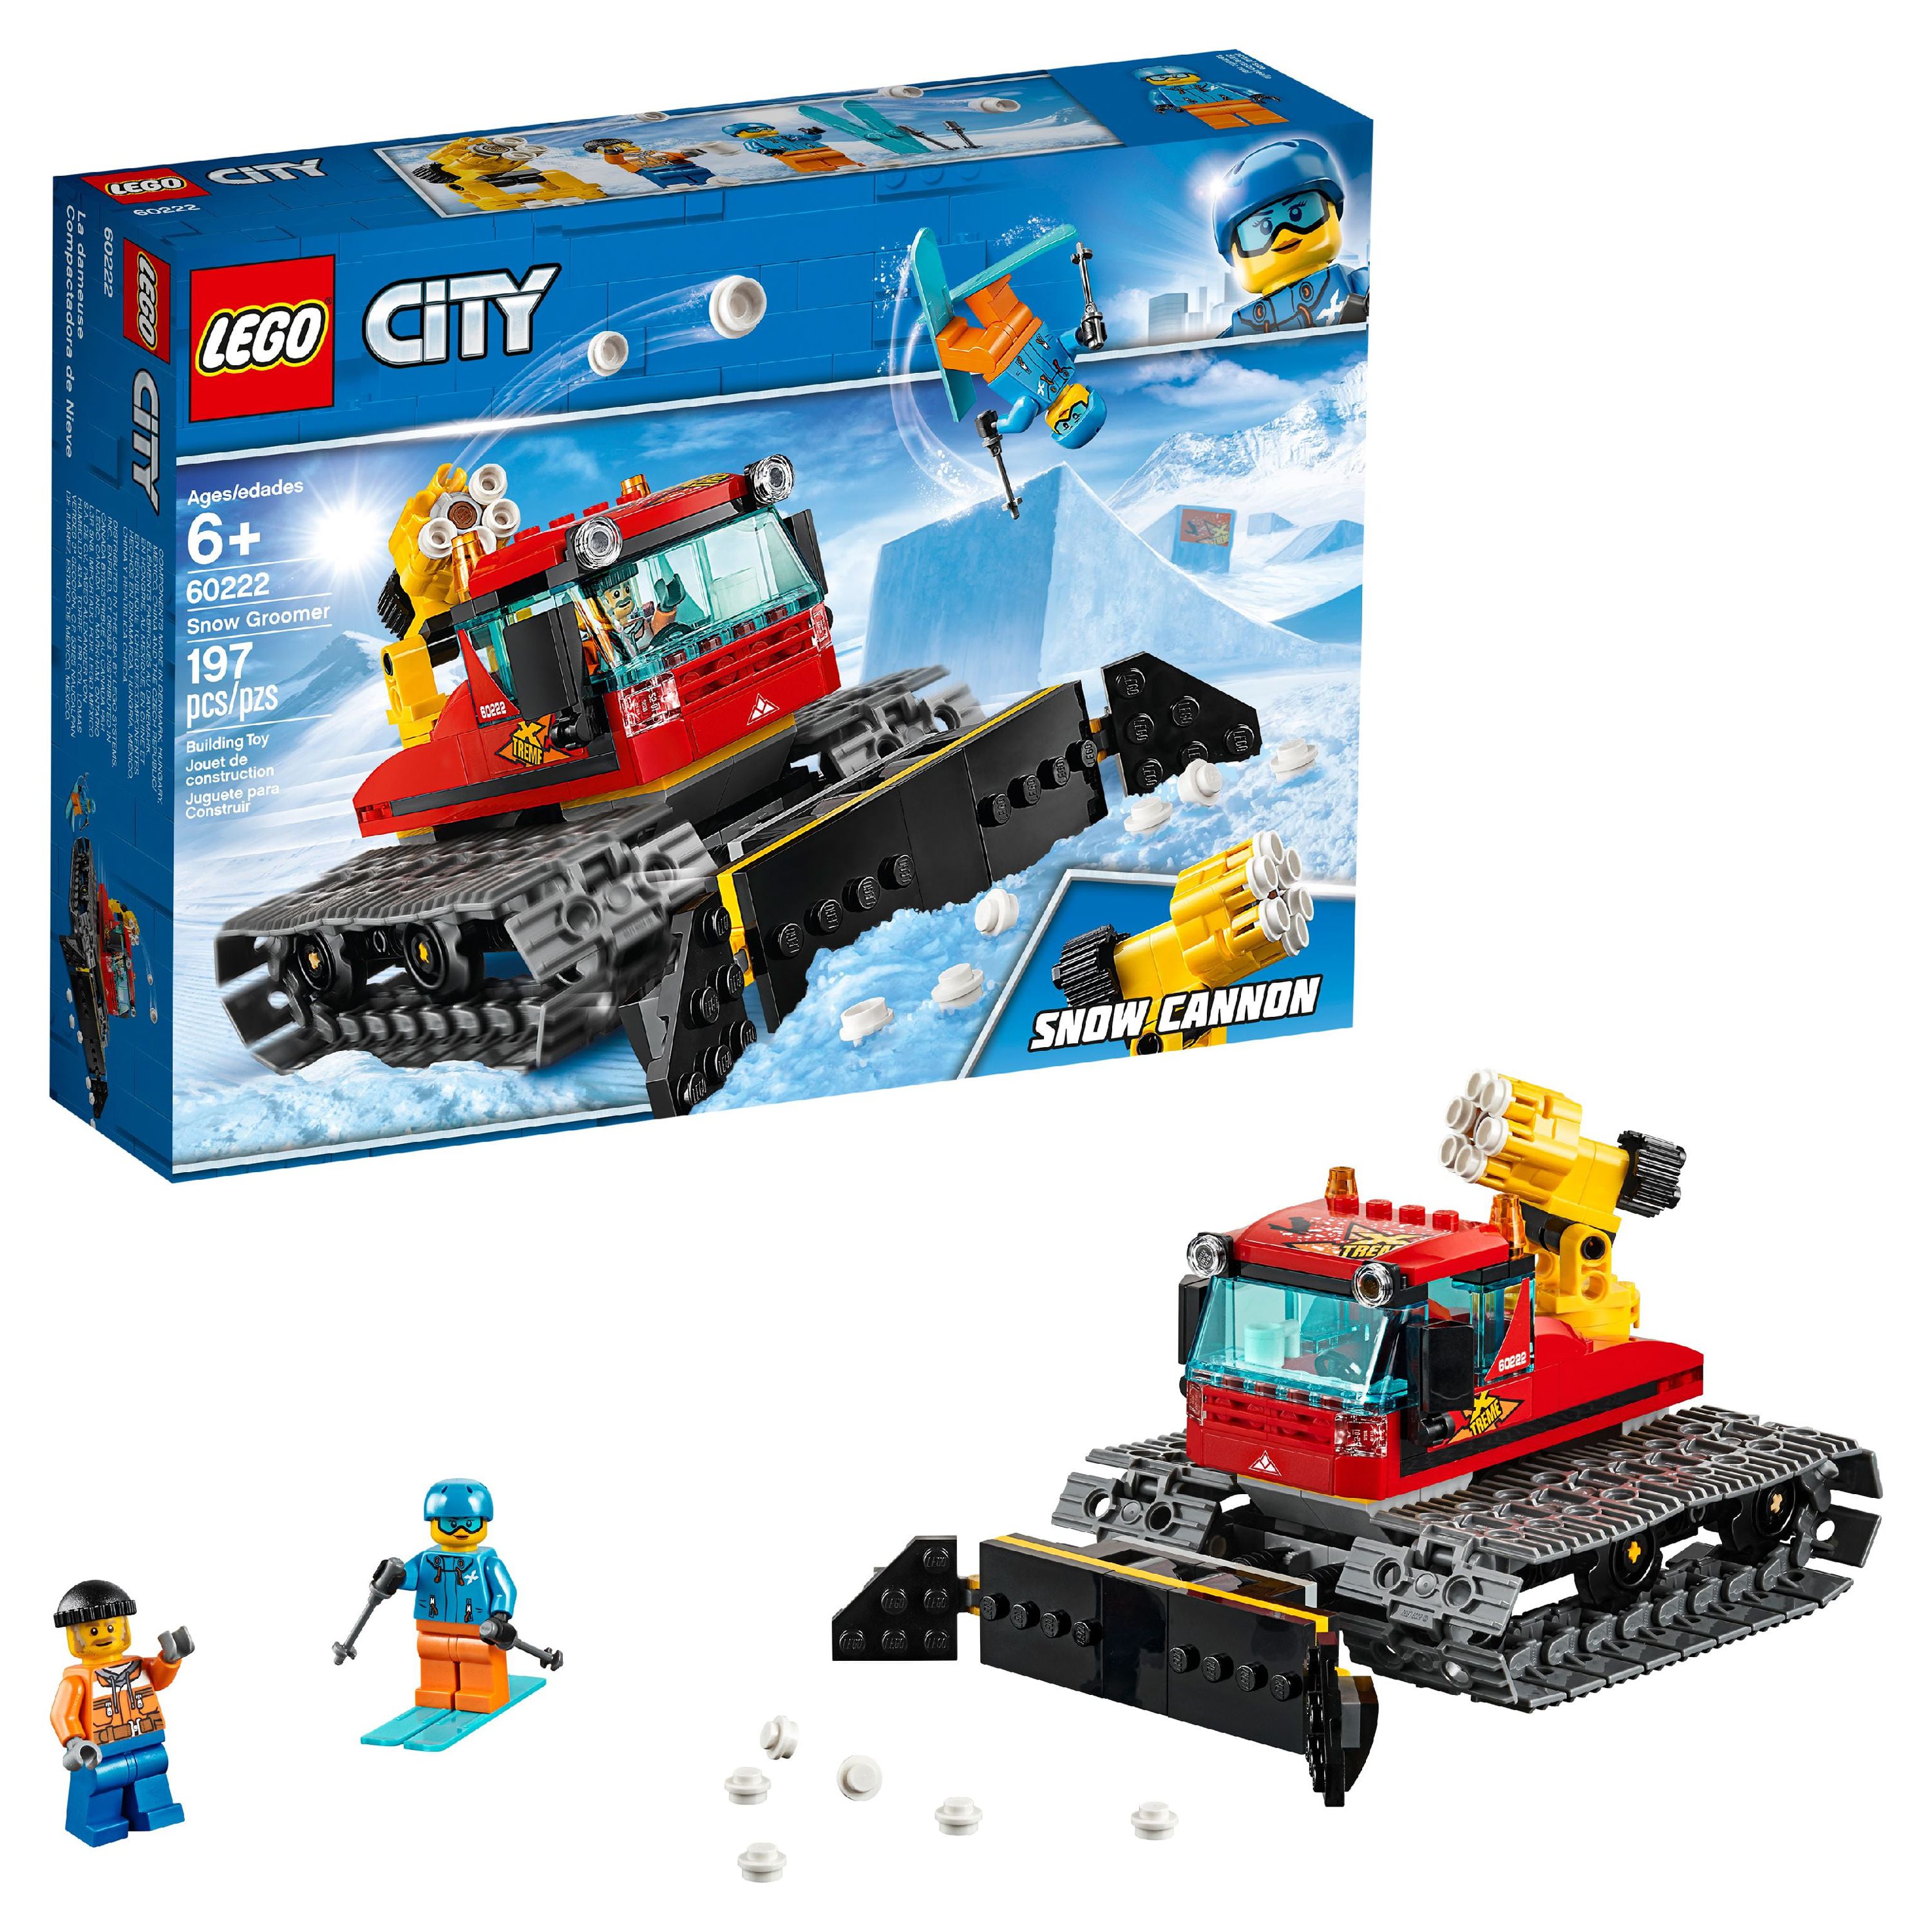 LEGO City Great Vehicles Snow Groomer 60222 - image 1 of 8